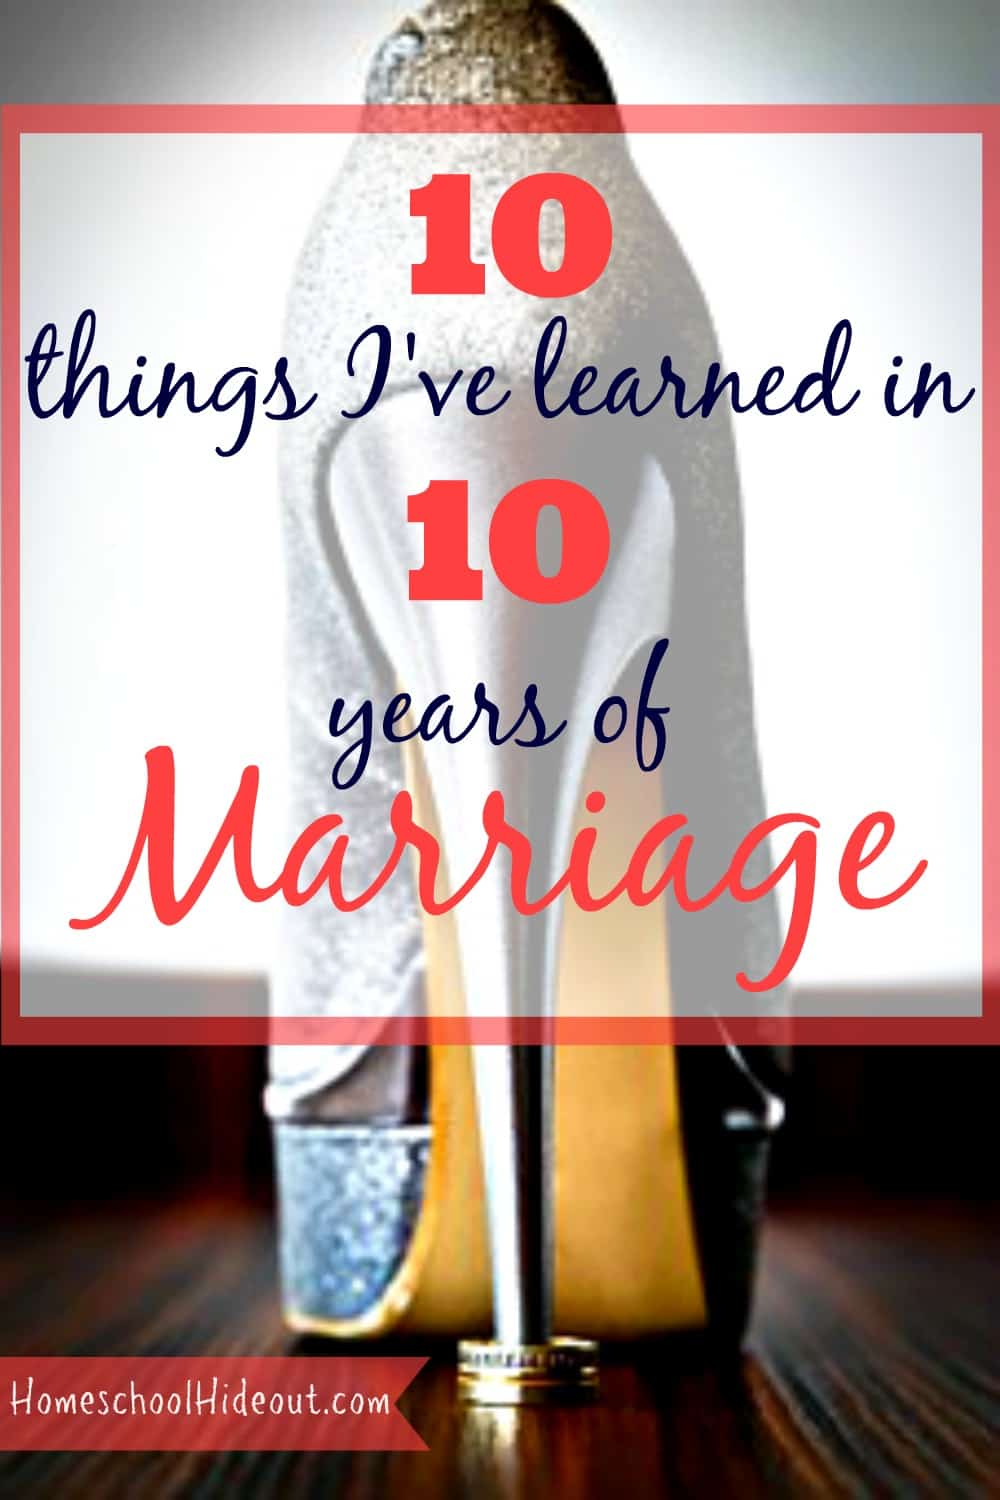 10 years of marriage